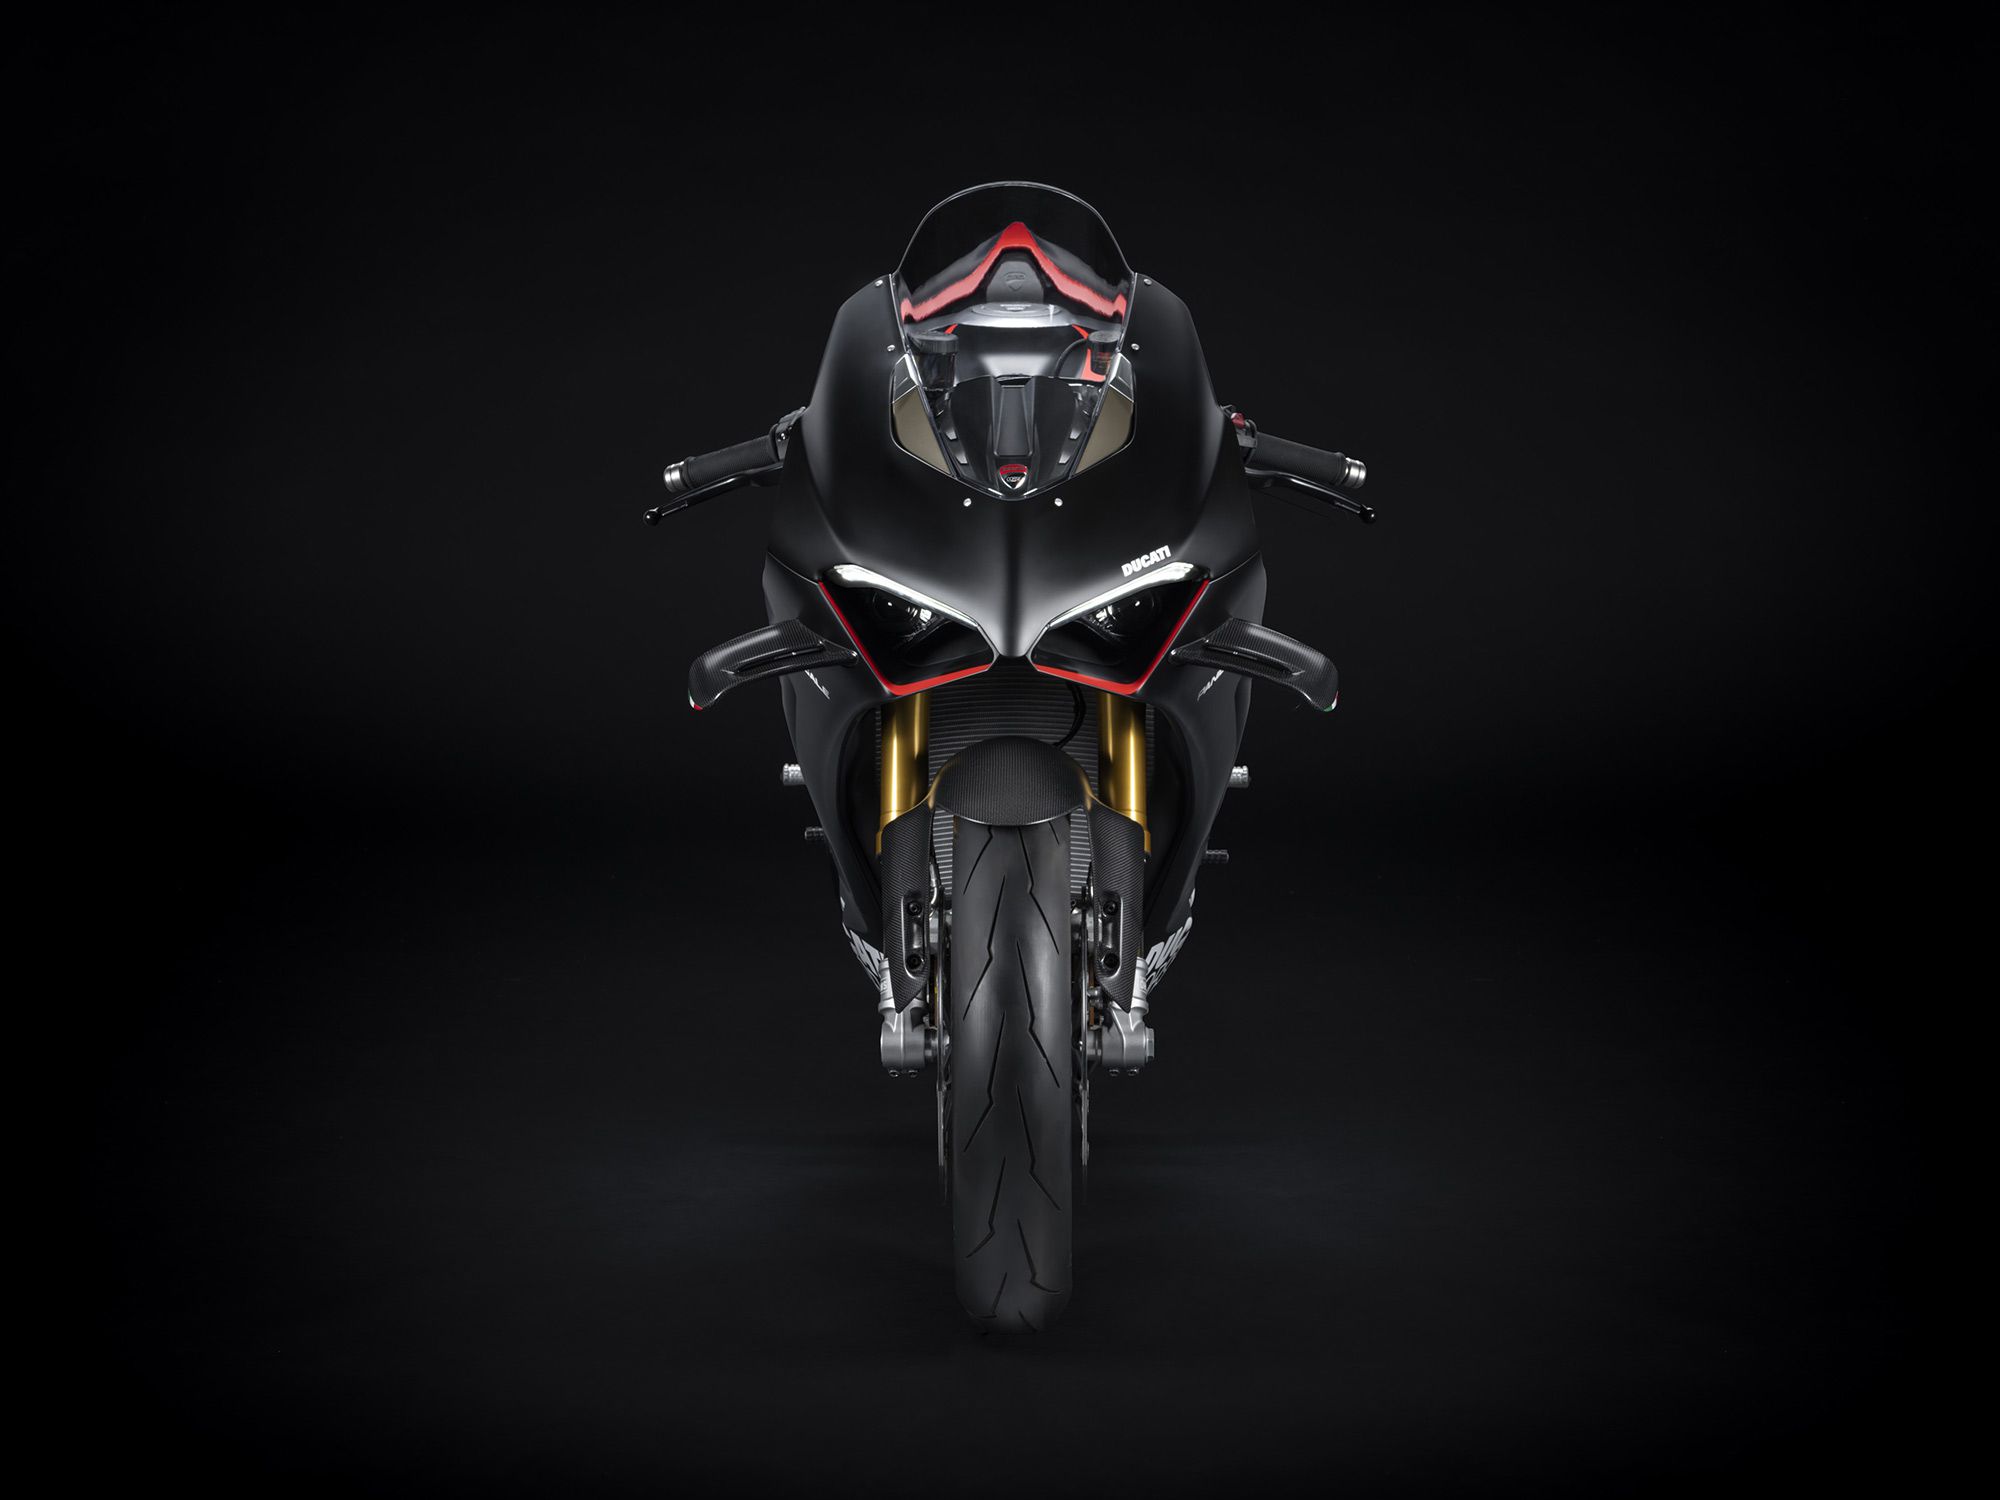 Ducati optimized aerodynamic efficiency on the 2022 V4; design updates help make the SP2 an even more effective track weapon.